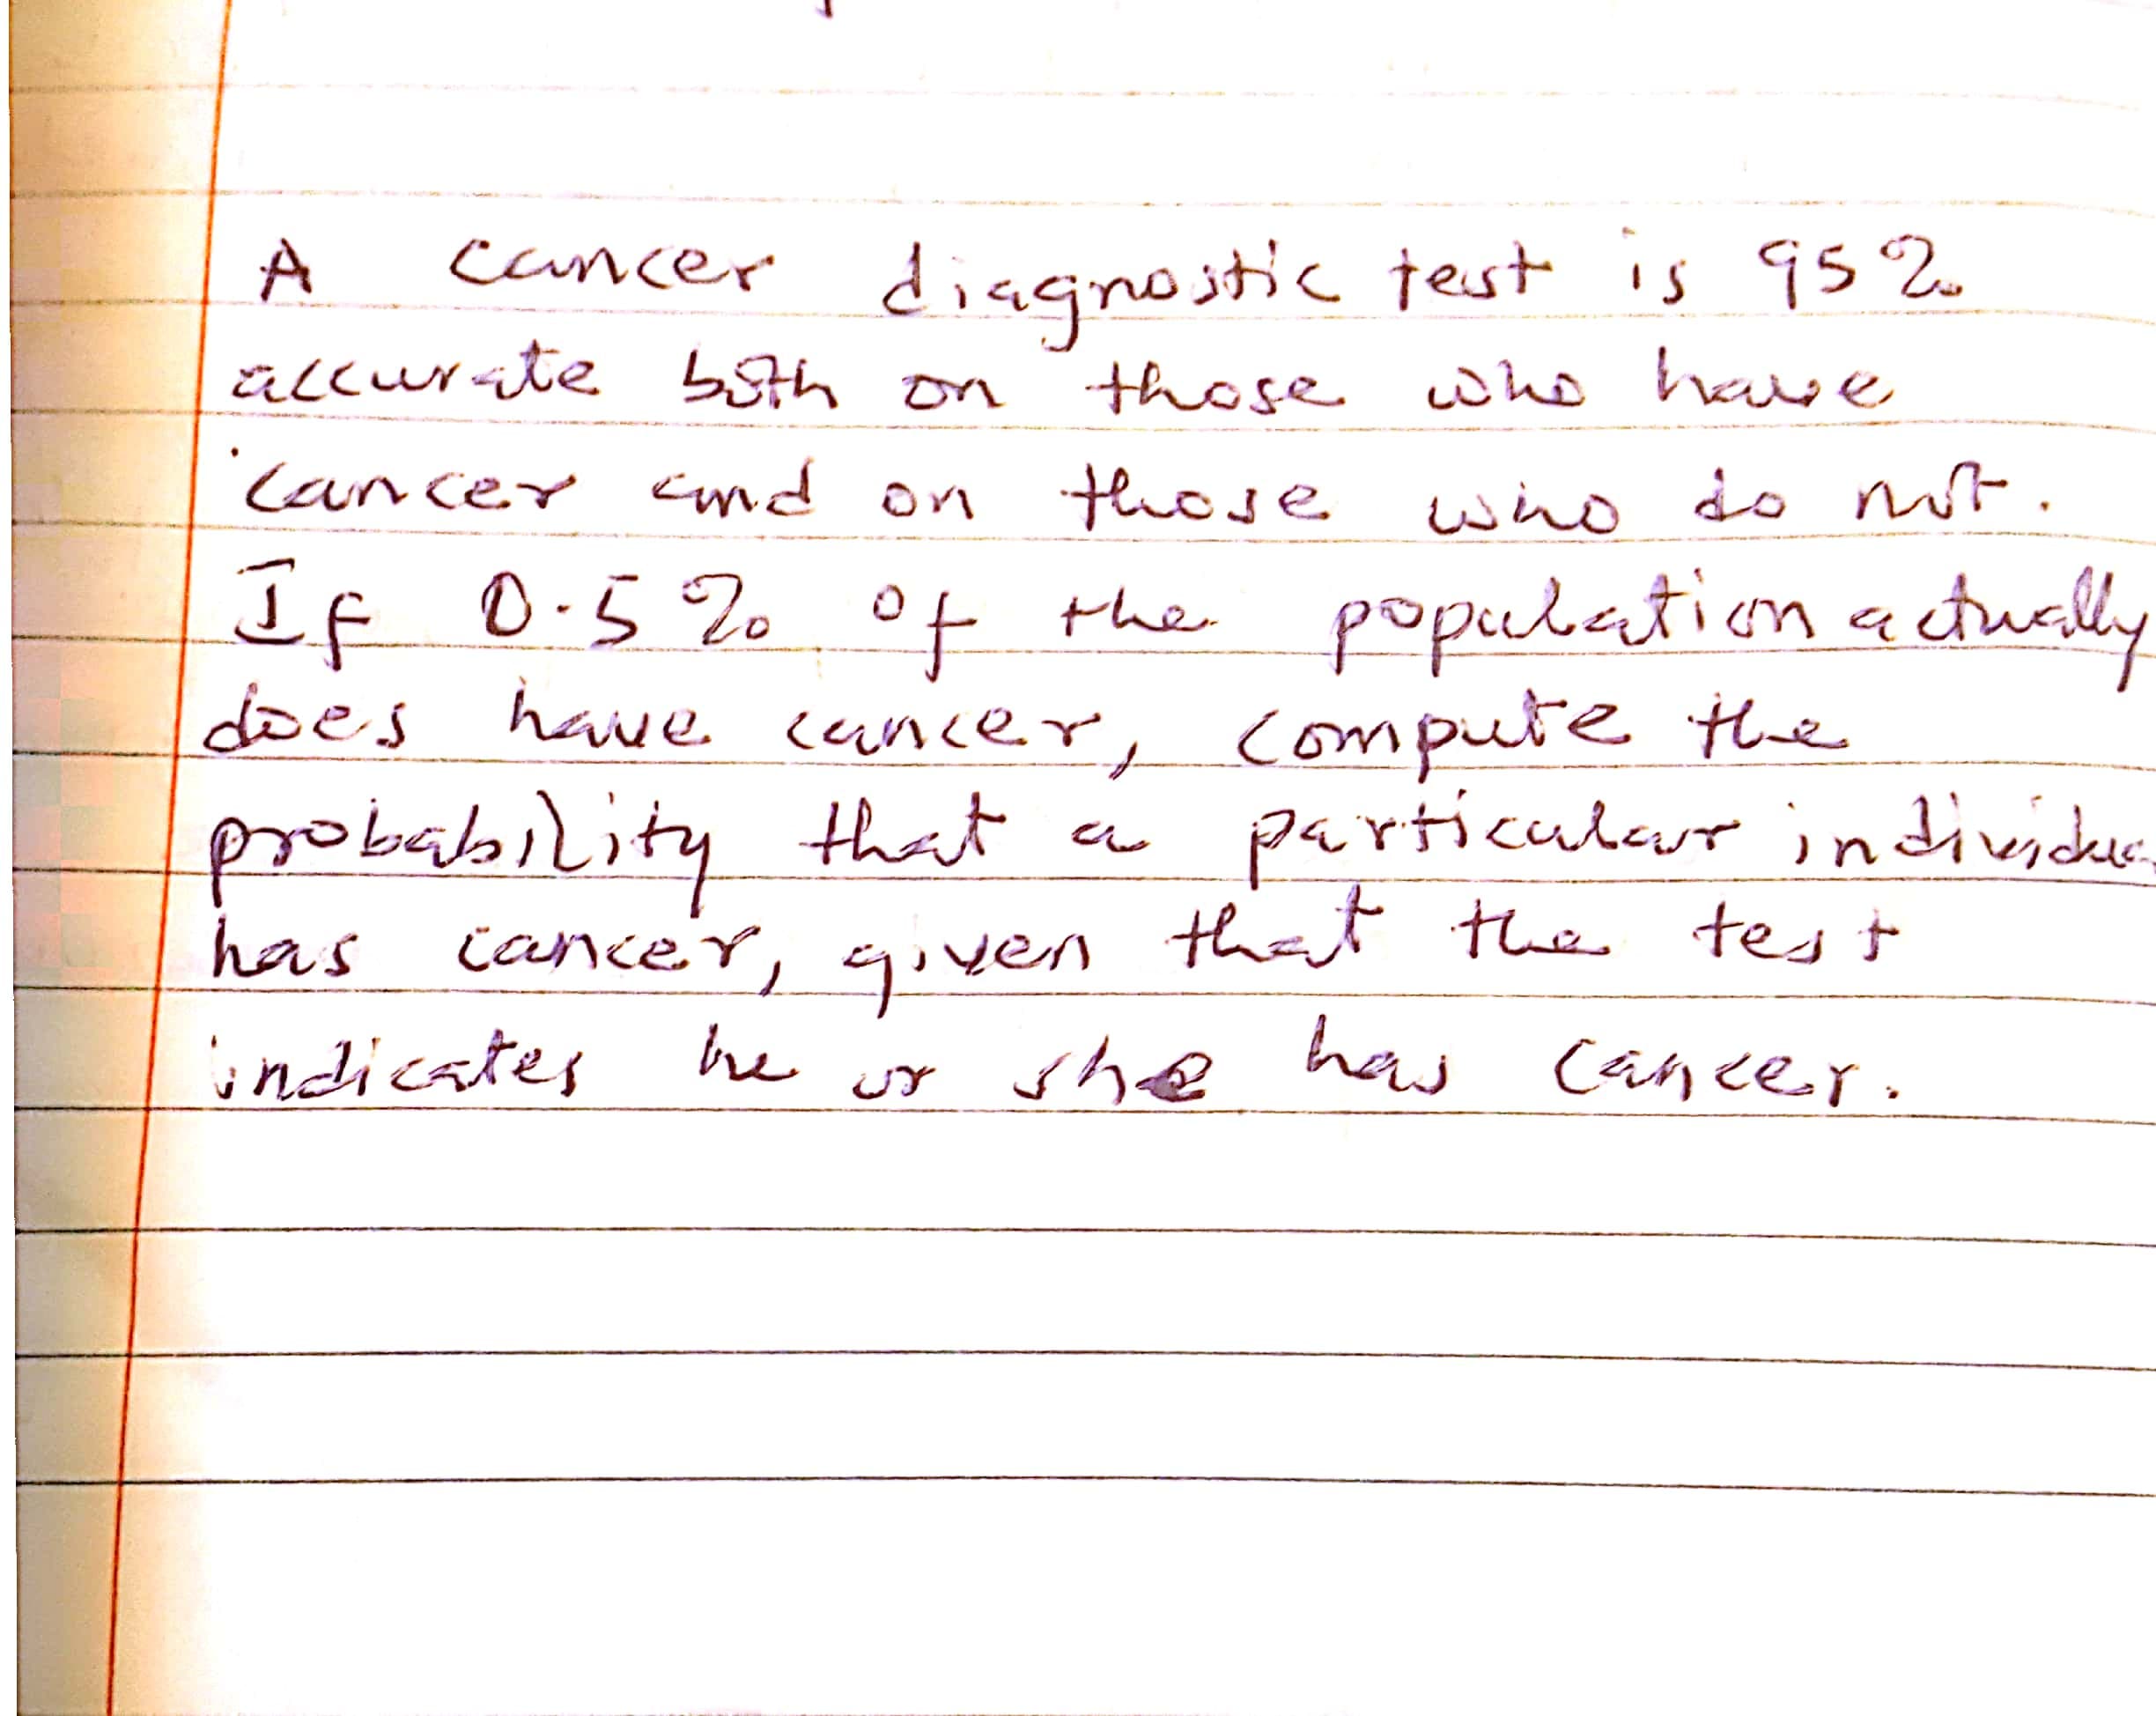 cancer u
alcurate 5th on
diagnostic test is 9s 2
those who halse
A
'cancer cnd on those wno do not
